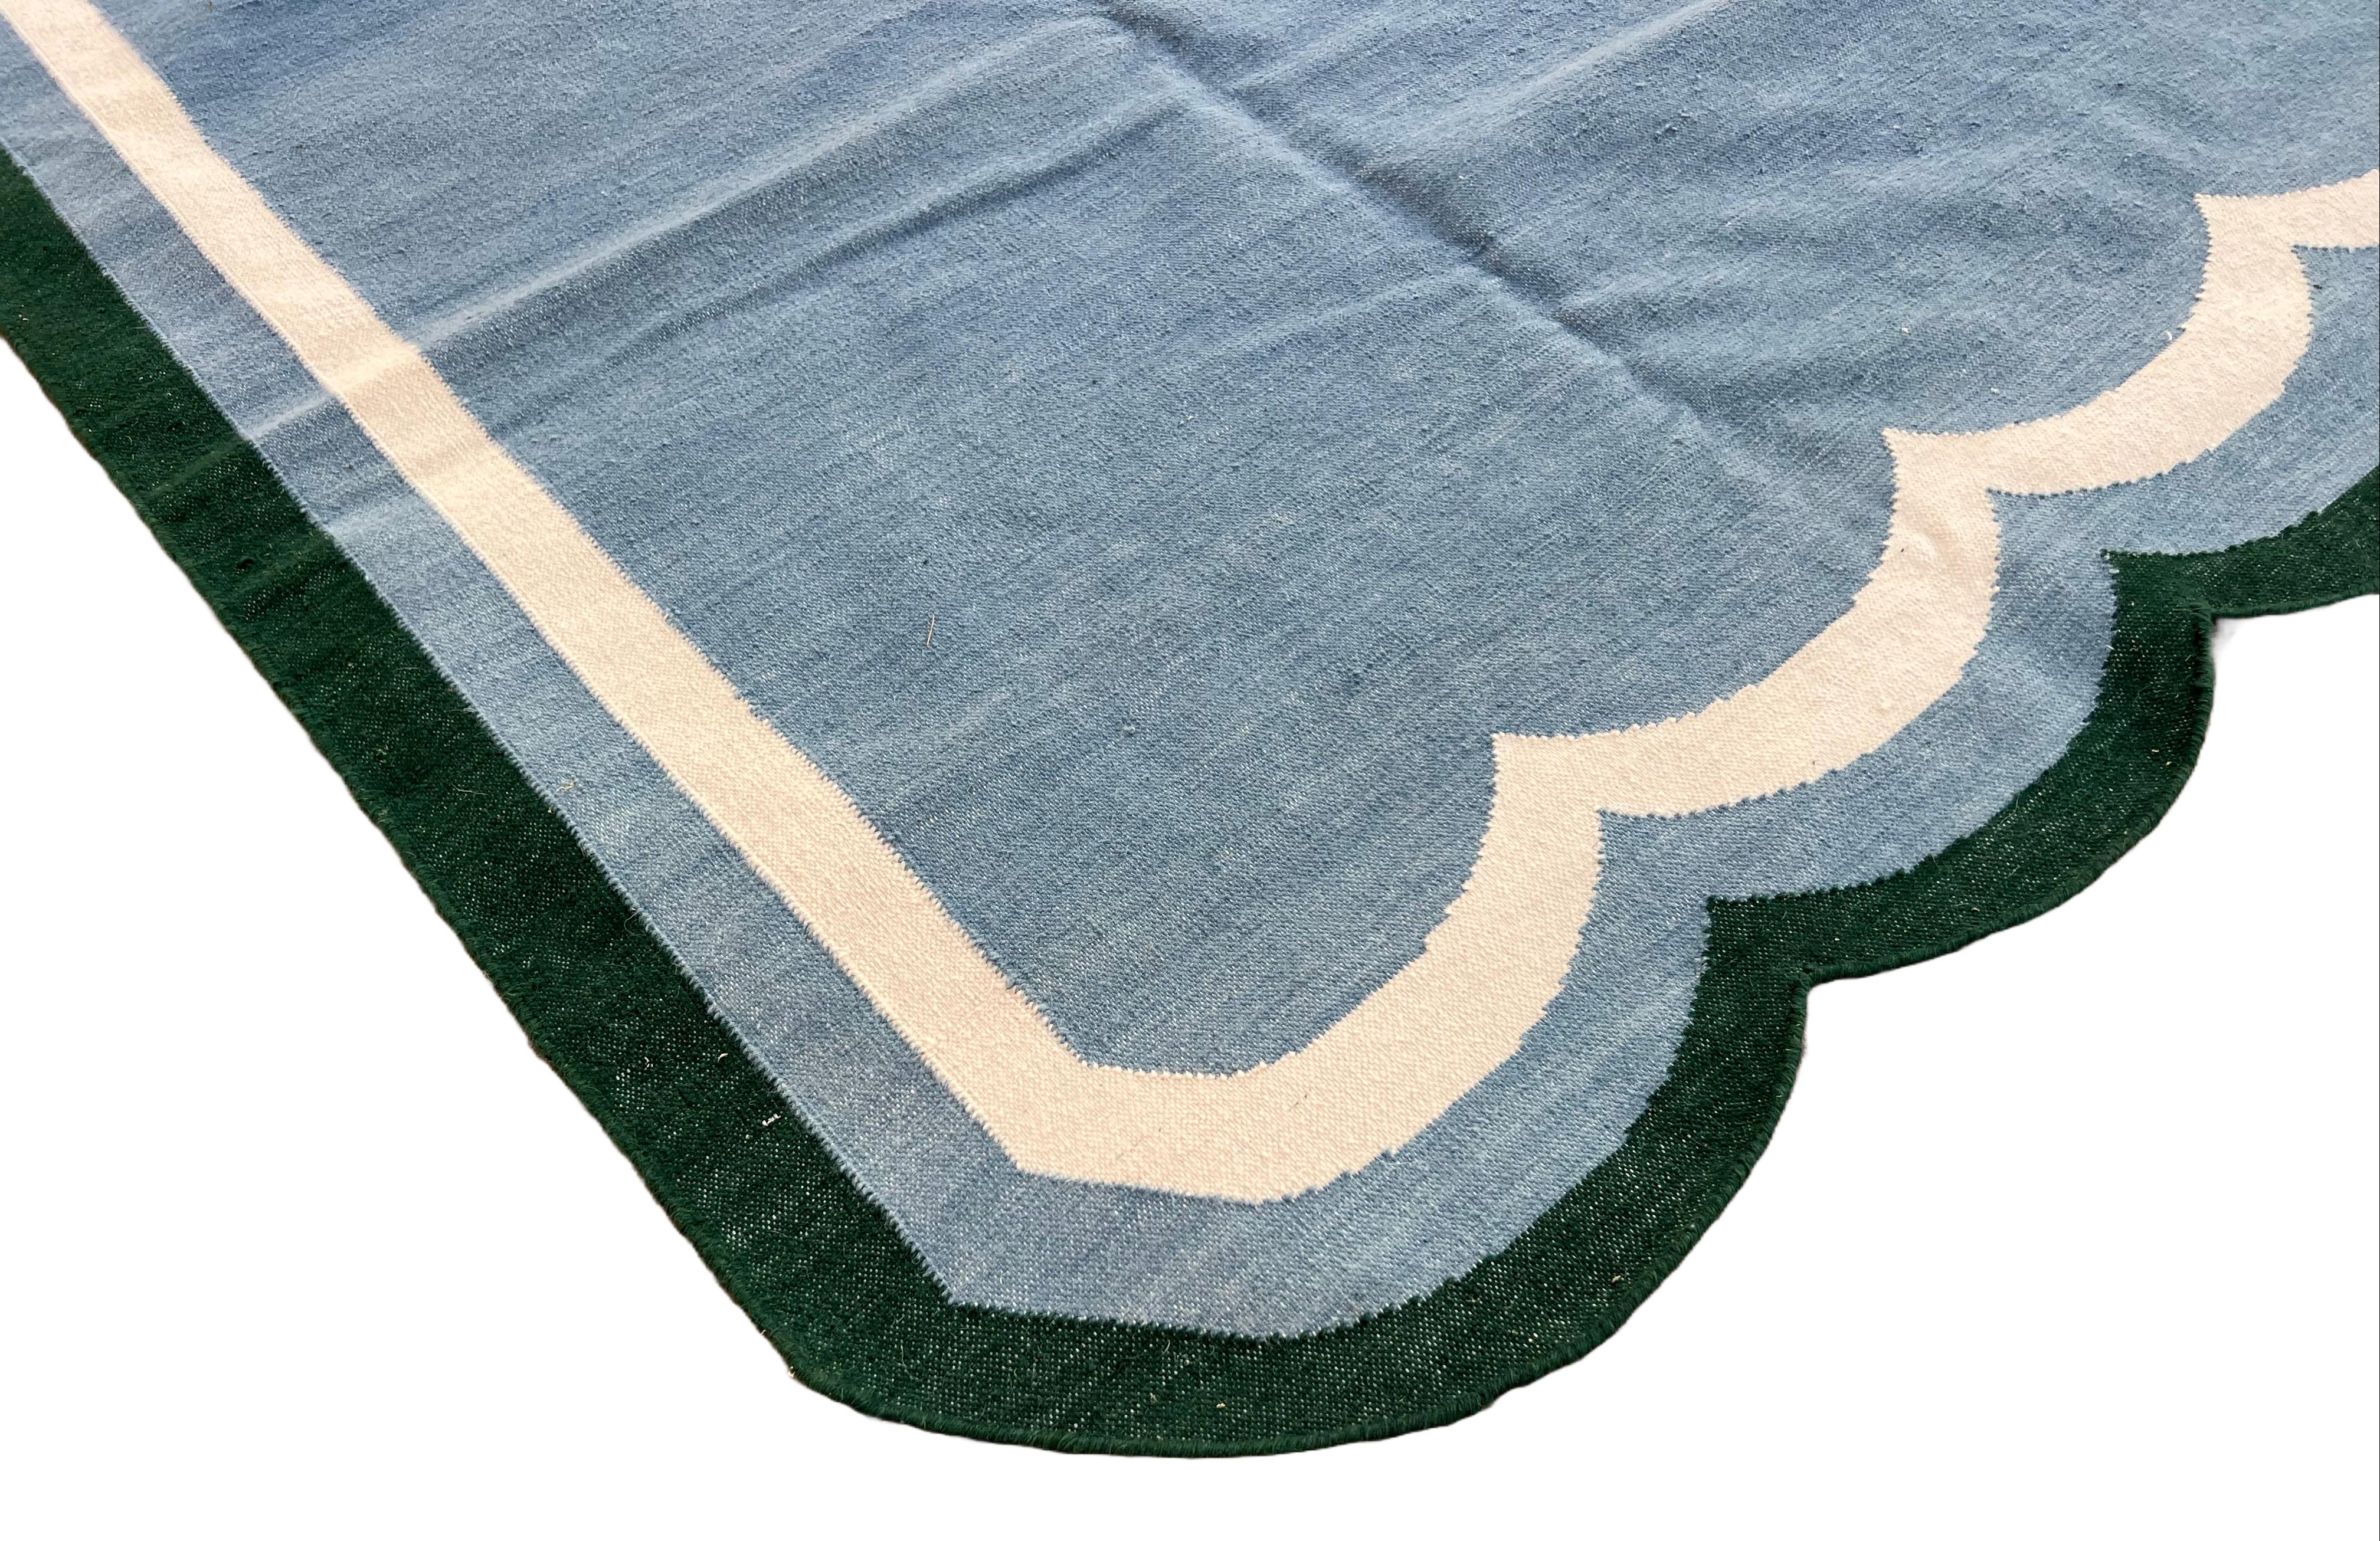 Handmade New Zealand Wool Vegetable Dyed Sky Blue, Cream And Forest Green Scalloped Striped Indian Dhurrie Rug- 8'x10' (240x300cm) 
Scallops runs on 8' sides

These special flat-weave dhurries are hand-woven with 15 ply 100% cotton yarn. Due to the